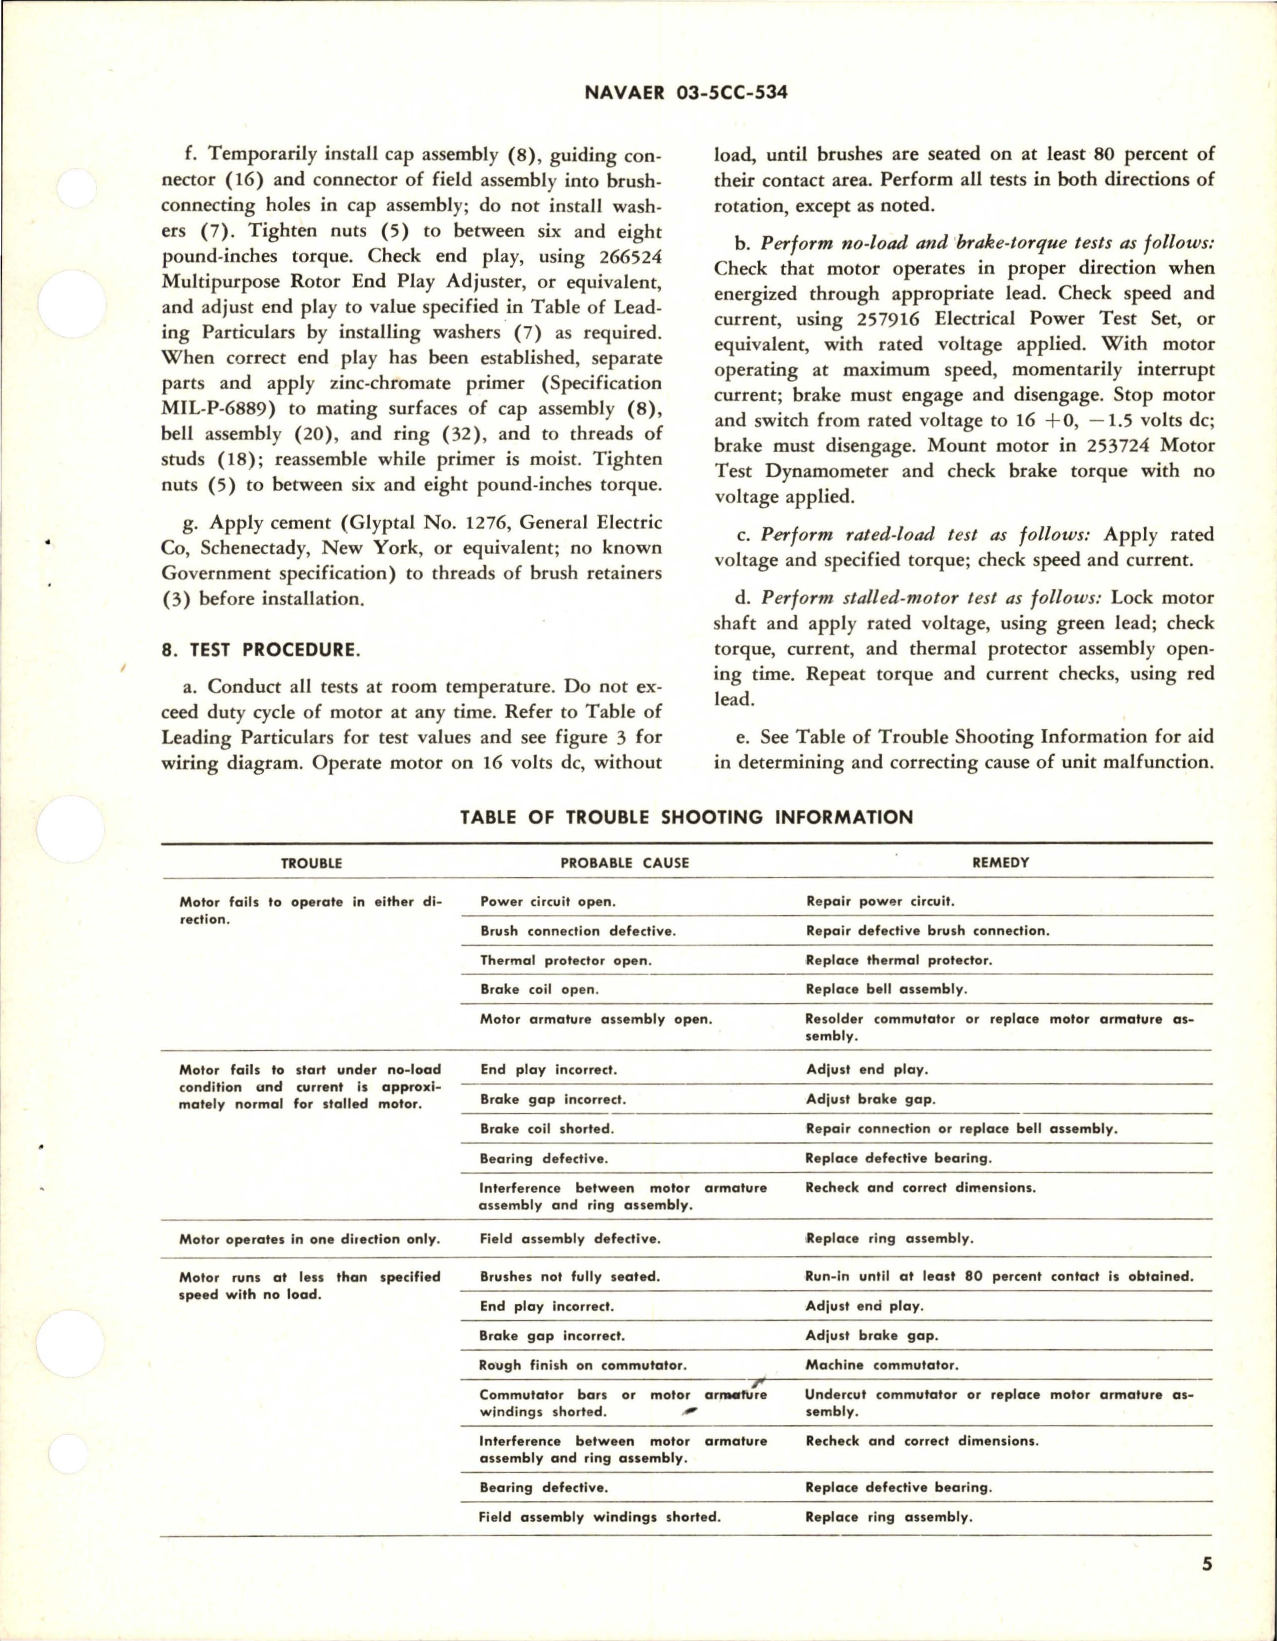 Sample page 5 from AirCorps Library document: Overhaul Instructions with Parts Breakdown for Direct Current Motor - 0.035 HP - Part 32718 - Model DCM15-89-1